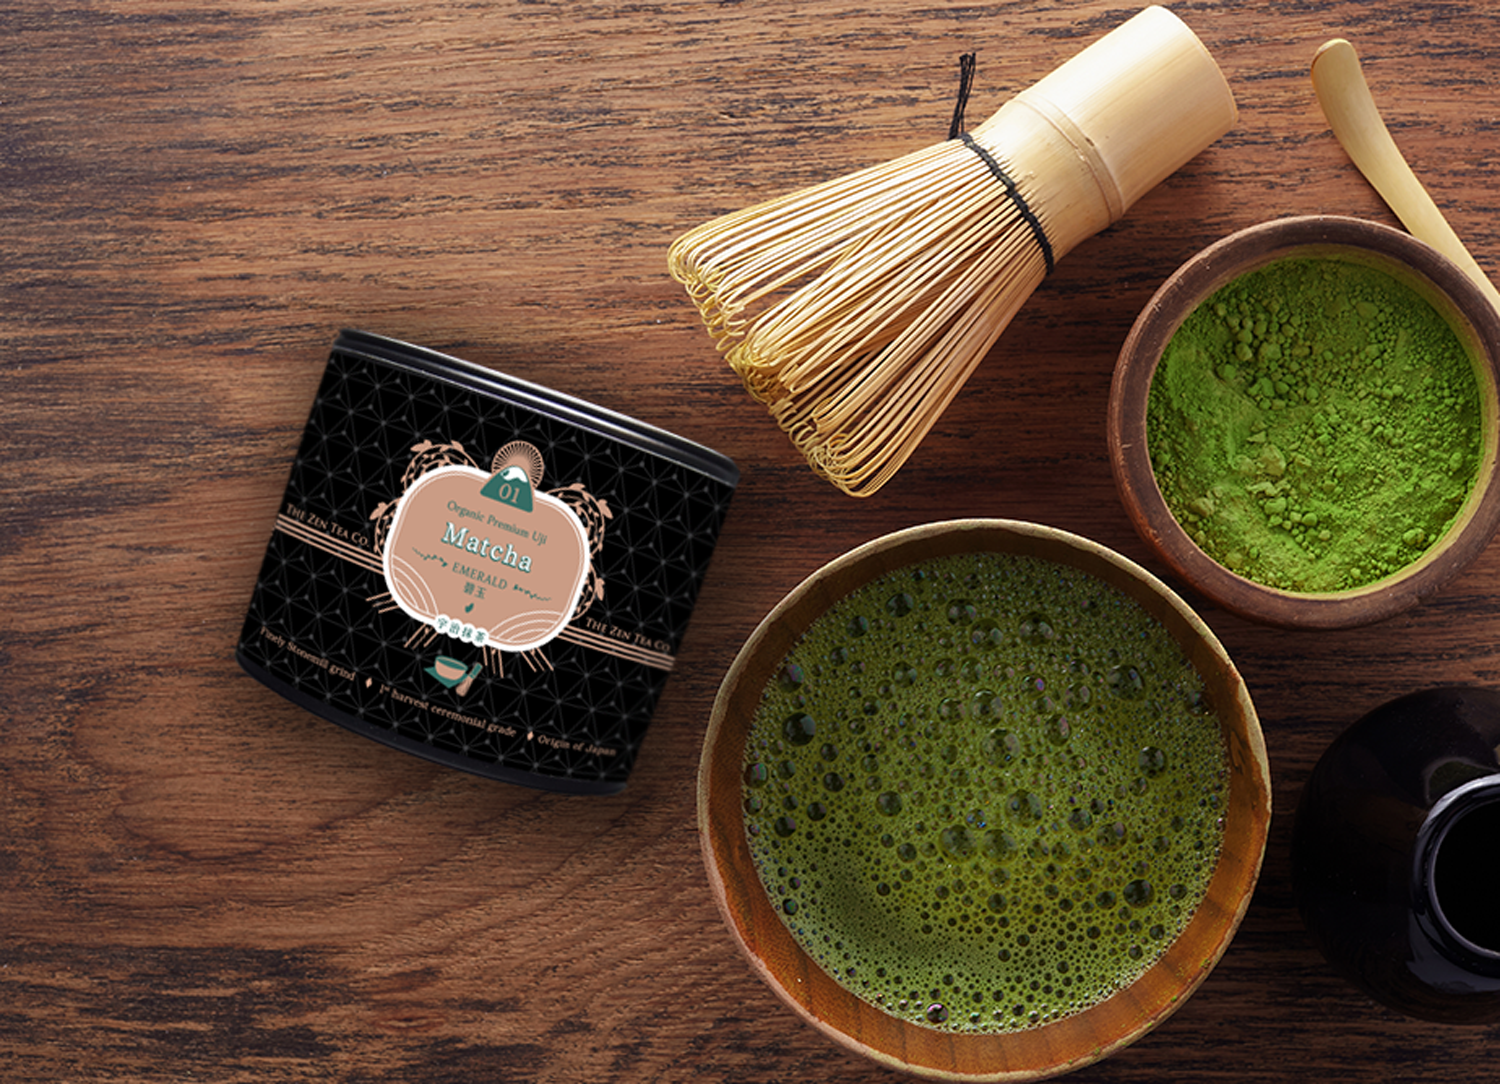 MATCHA ELECTRIC FROTHER WHISK - The Specialist Tea Co.